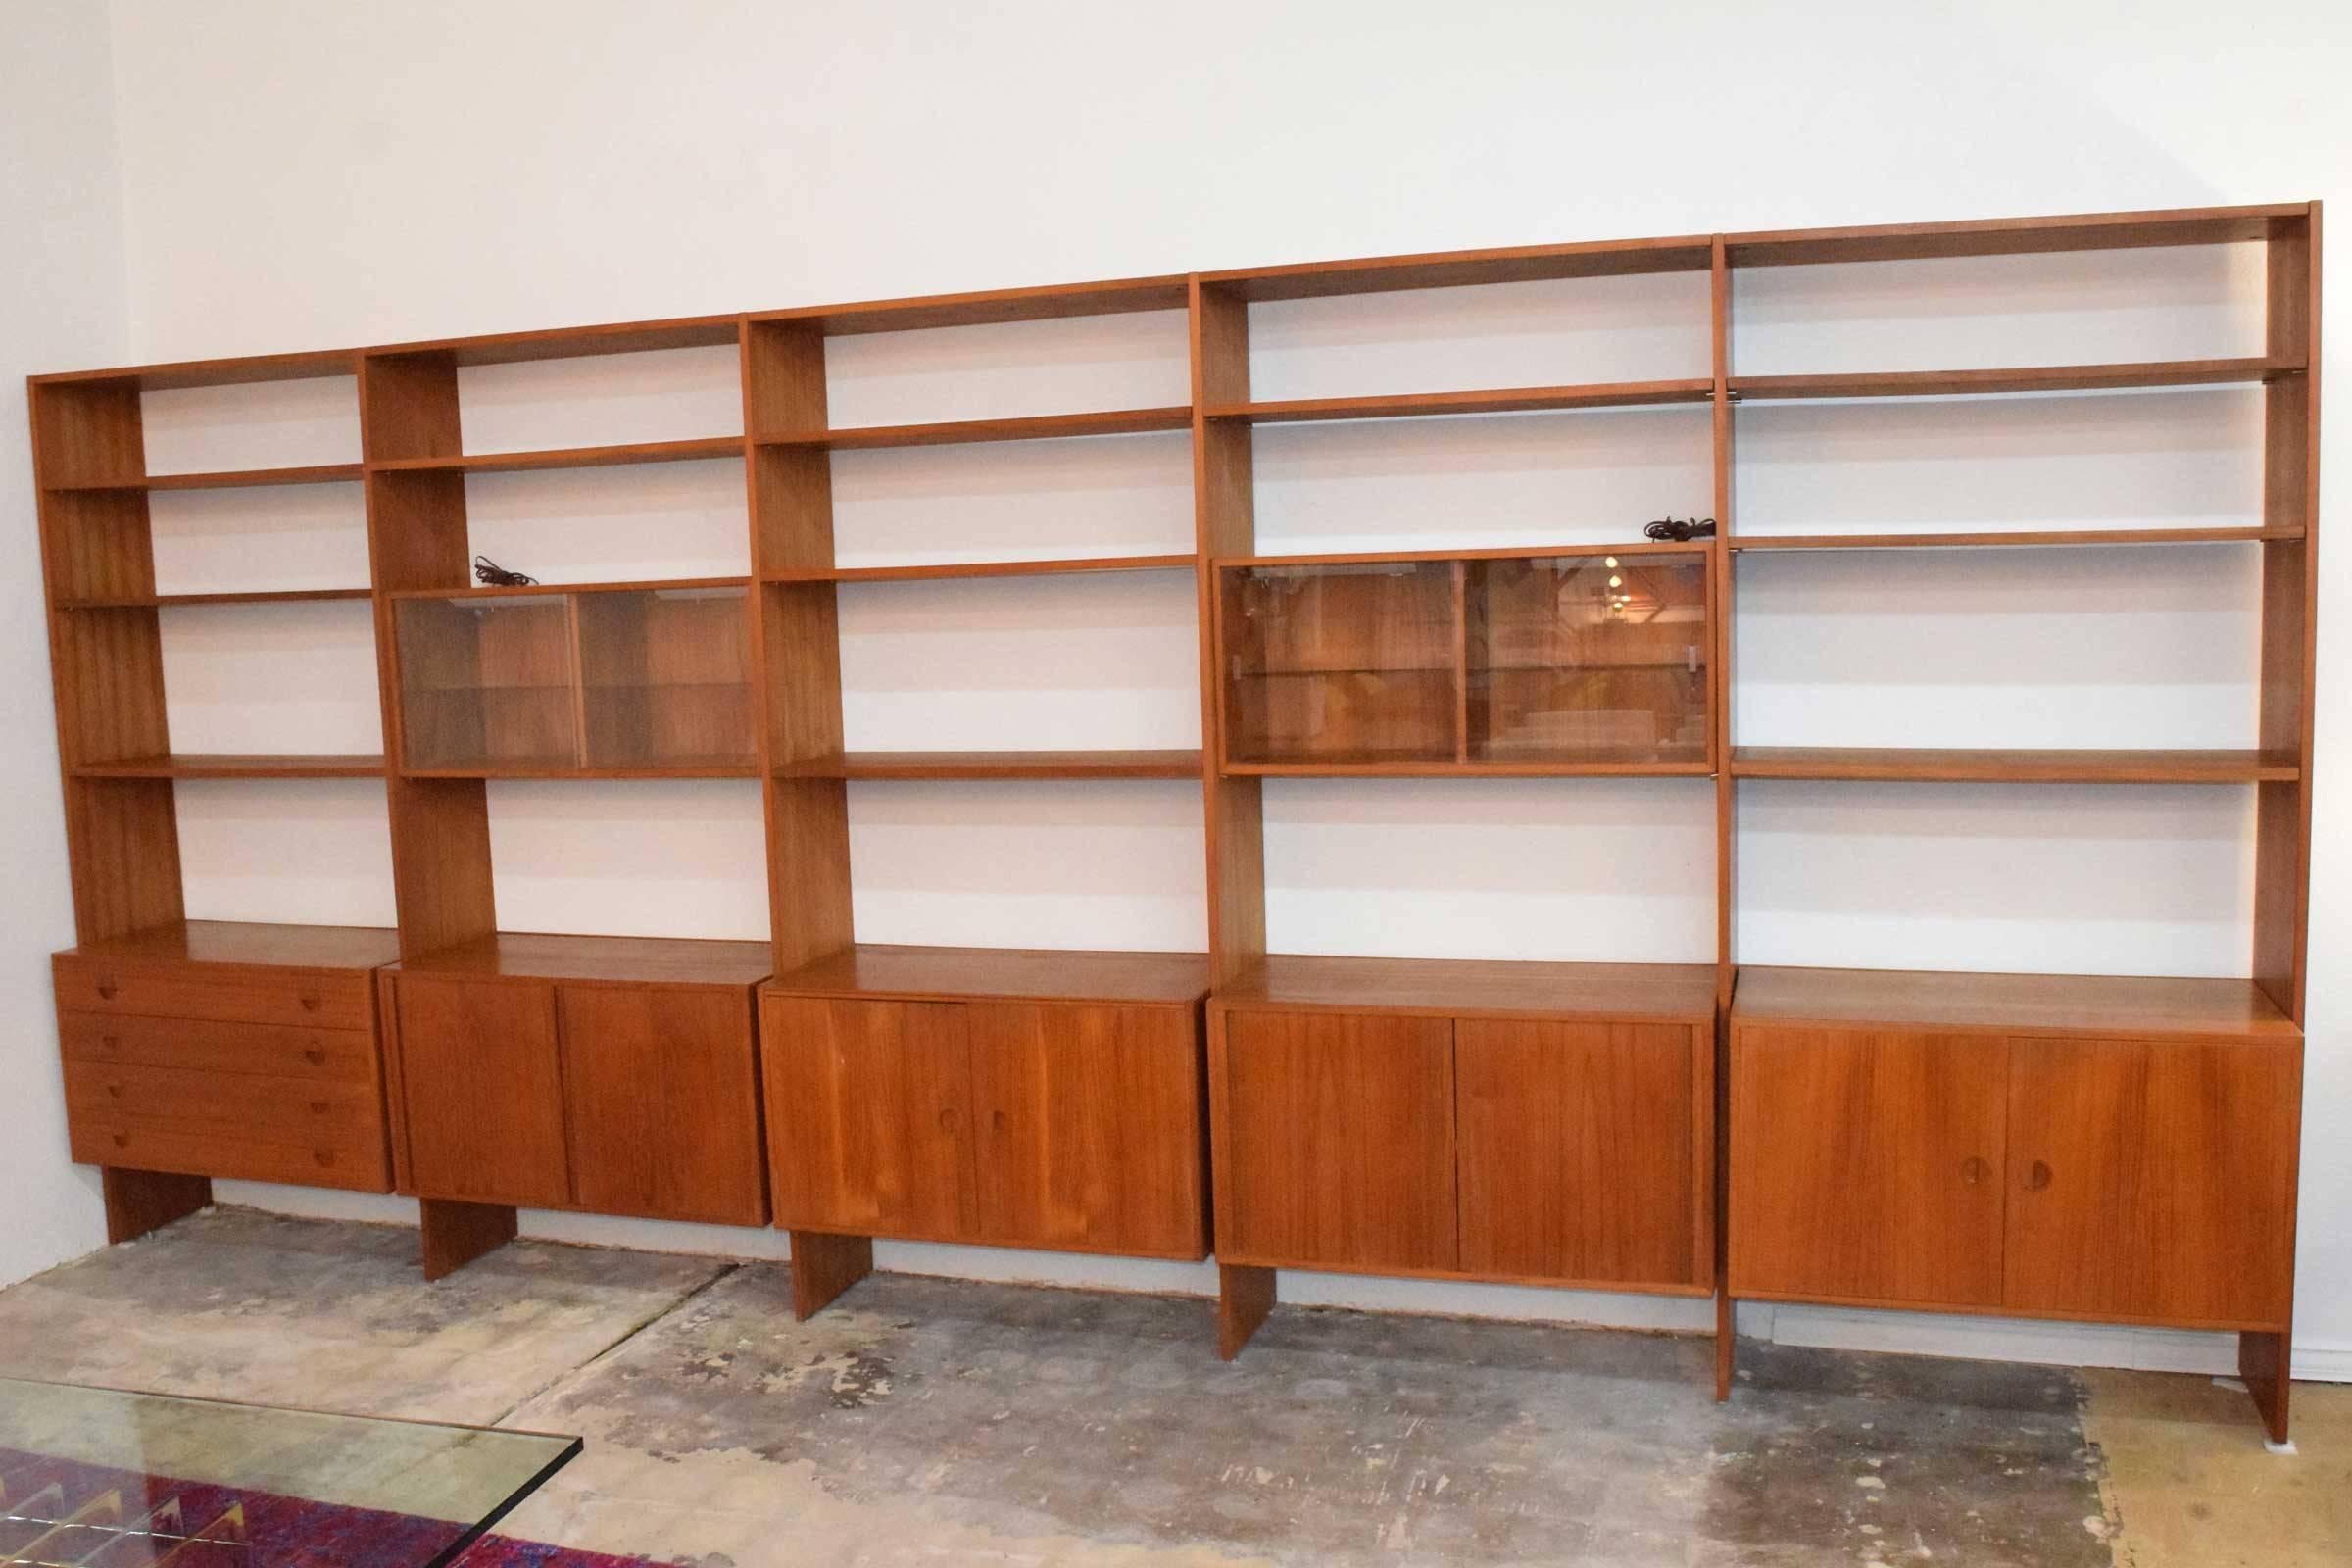 Large teak modular wall unit by HG Furniture (Hansen & Guldborg). Unit is five sections and can be assembled in two, three, four or five sections. Two storage compartments with sliding glass fronts and working lighting. This unit has tons of